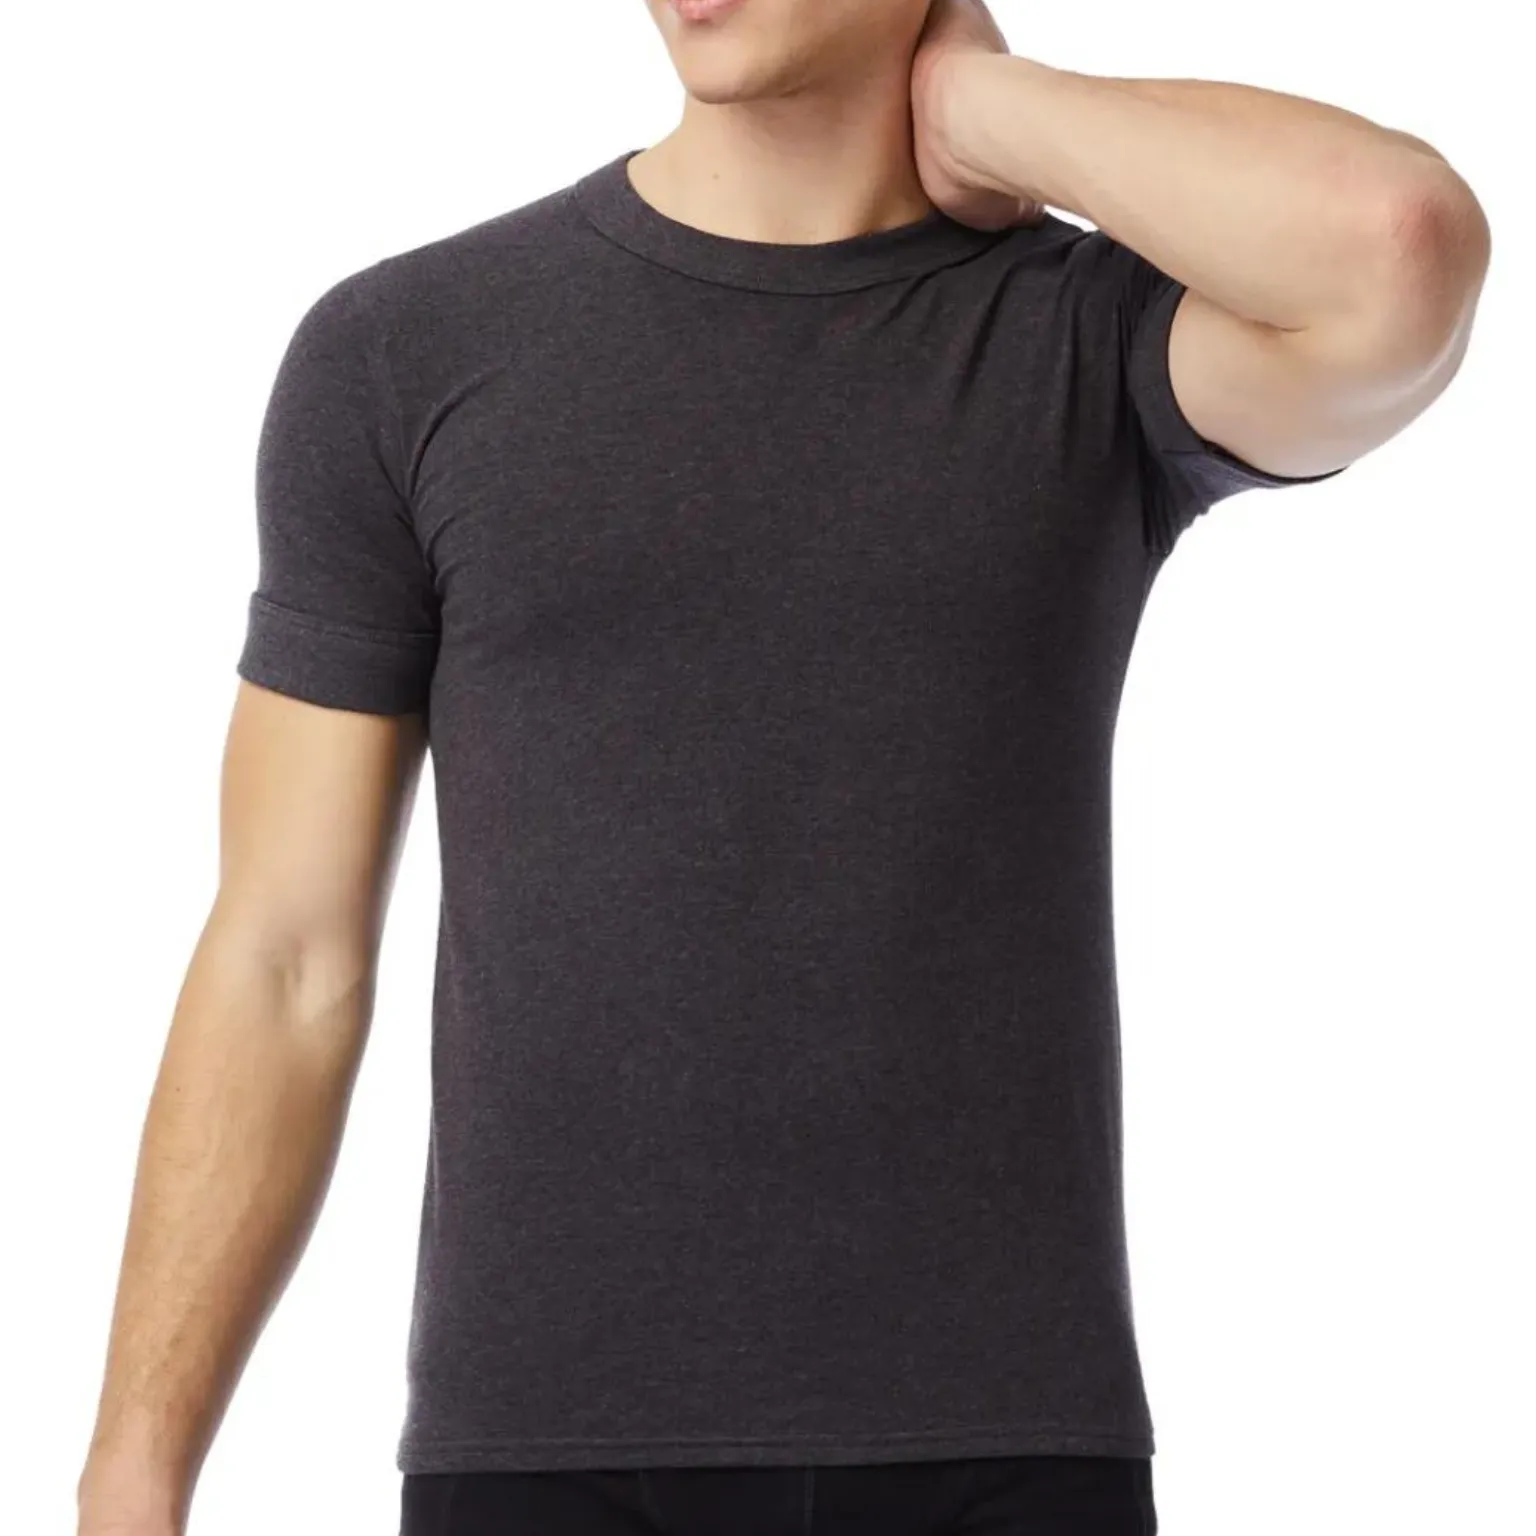 Tencel Undershirt manufacturing with trendy design